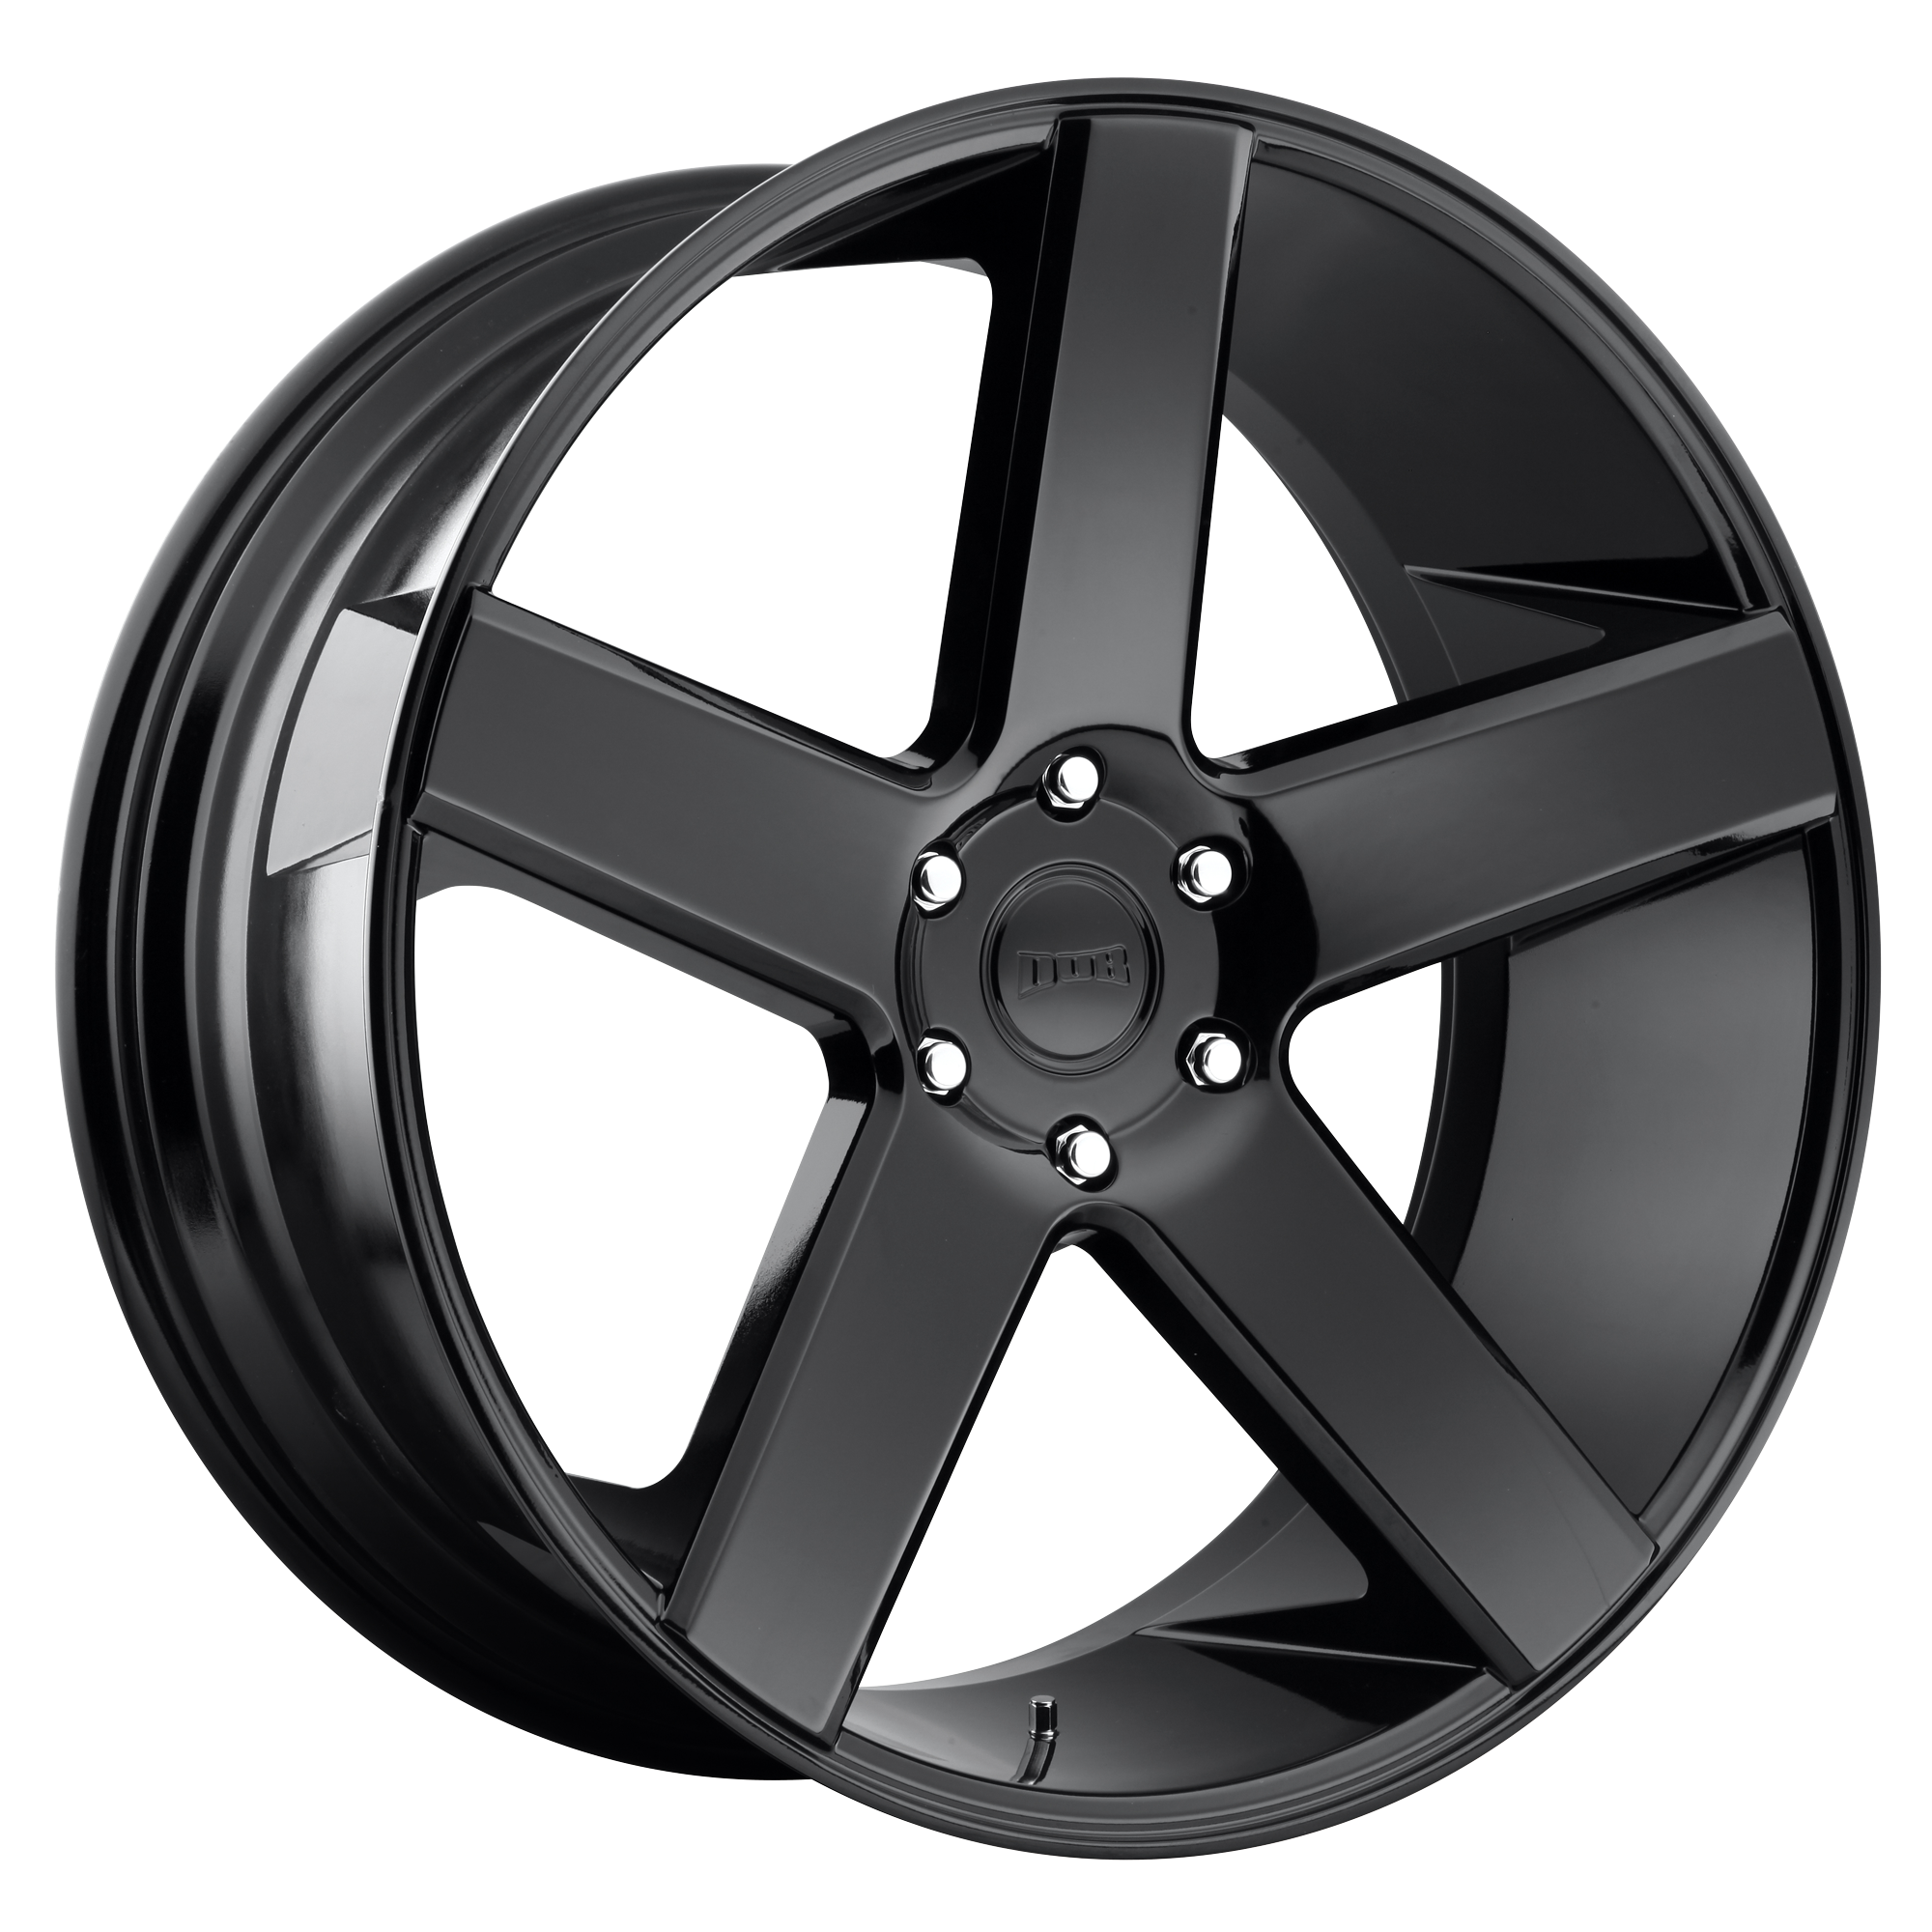 BALLER 22x8.5 5x120.00 GLOSS BLACK (35 mm) - Tires and Engine Performance